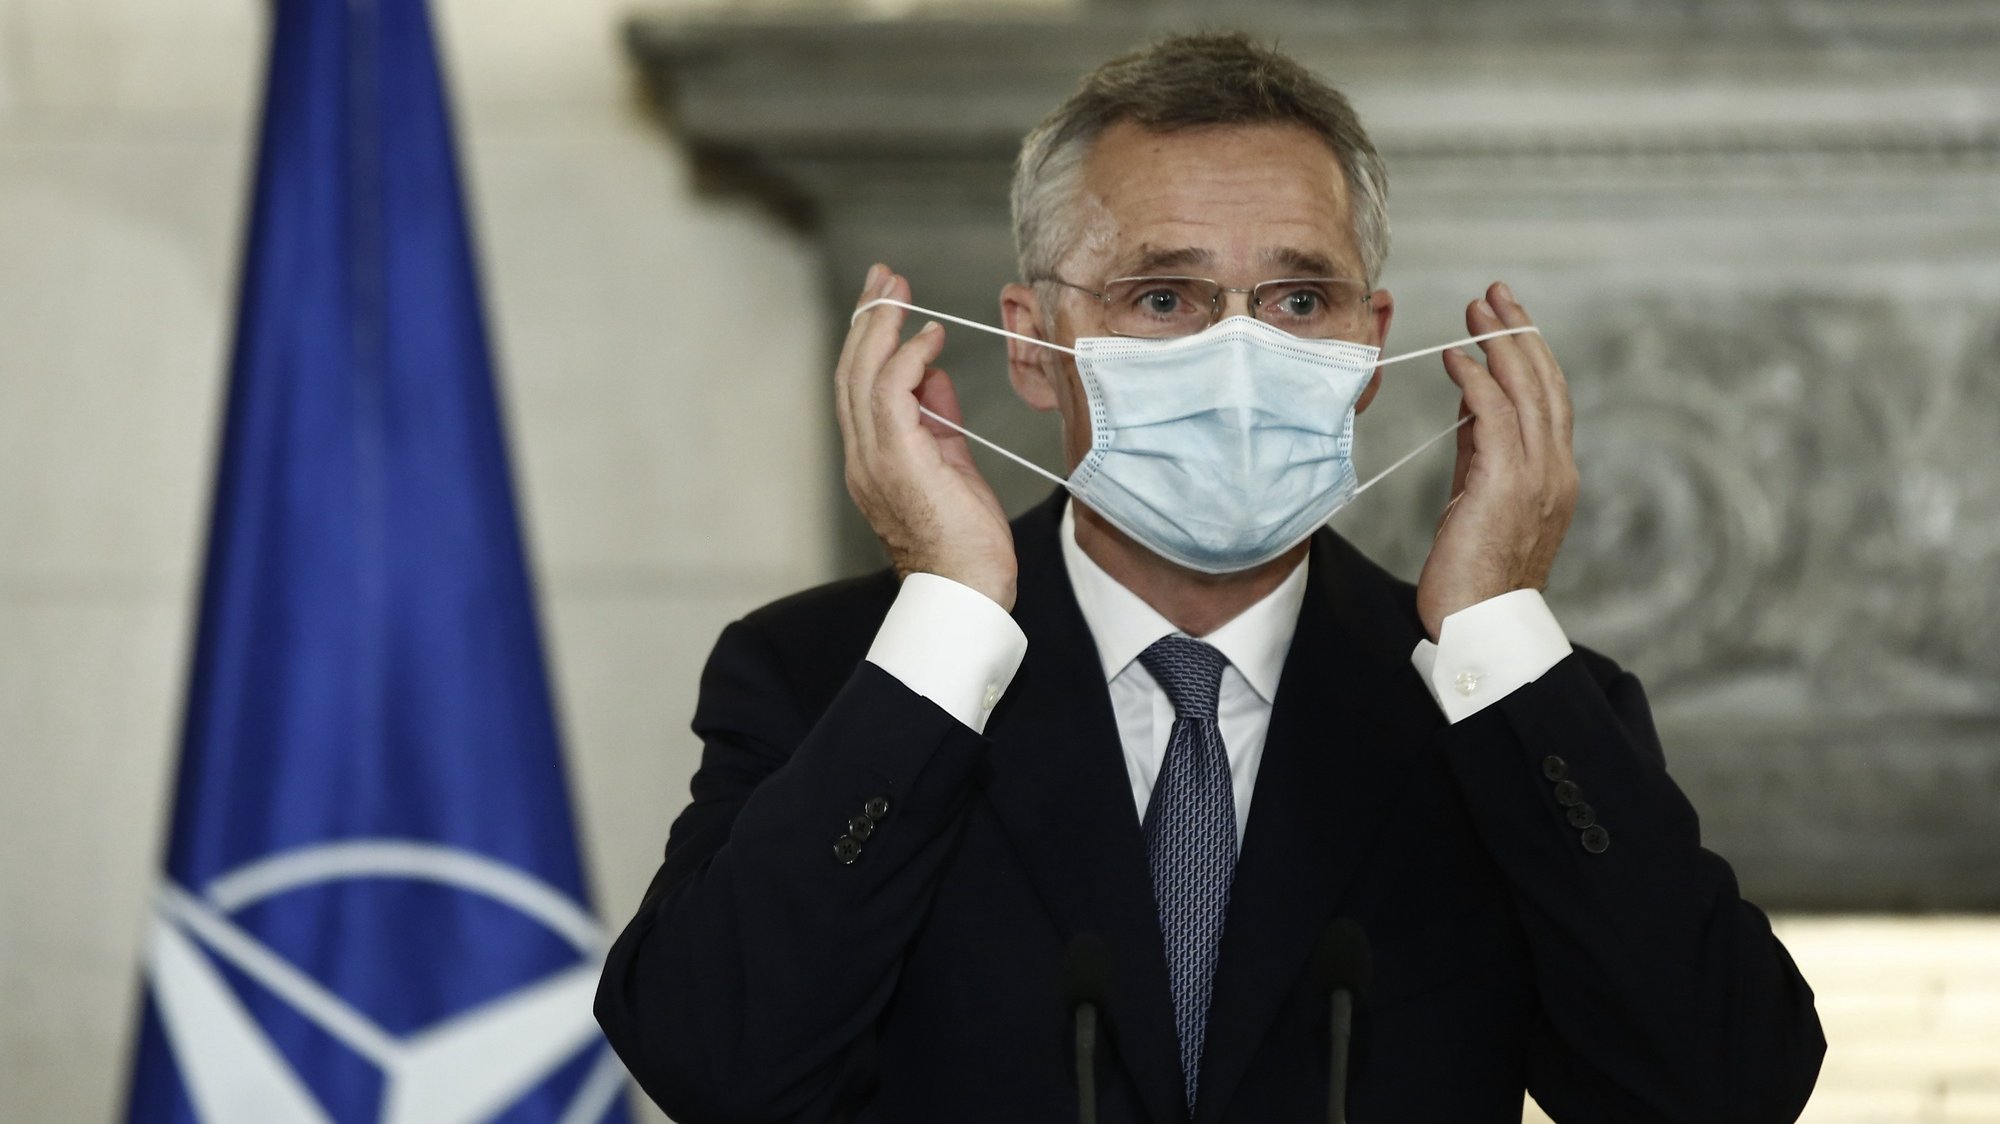 epa08723625 NATO Secretary General Jens Stoltenberg takes off his protective mask next to Greek Prime Minister Kyriakos Mitsotakis (not pictured ) during joint statements after his meeting in Athens, Greece, 06 October 2020. Greek Prime Minister Kyriakos Mitsotakis met NATO Secretary General Jens Stoltenberg in Athens, in the aftermath of a military de-confliction mechanism the alliance set up between Greece and Turkey.  EPA/YANNIS KOLESIDIS